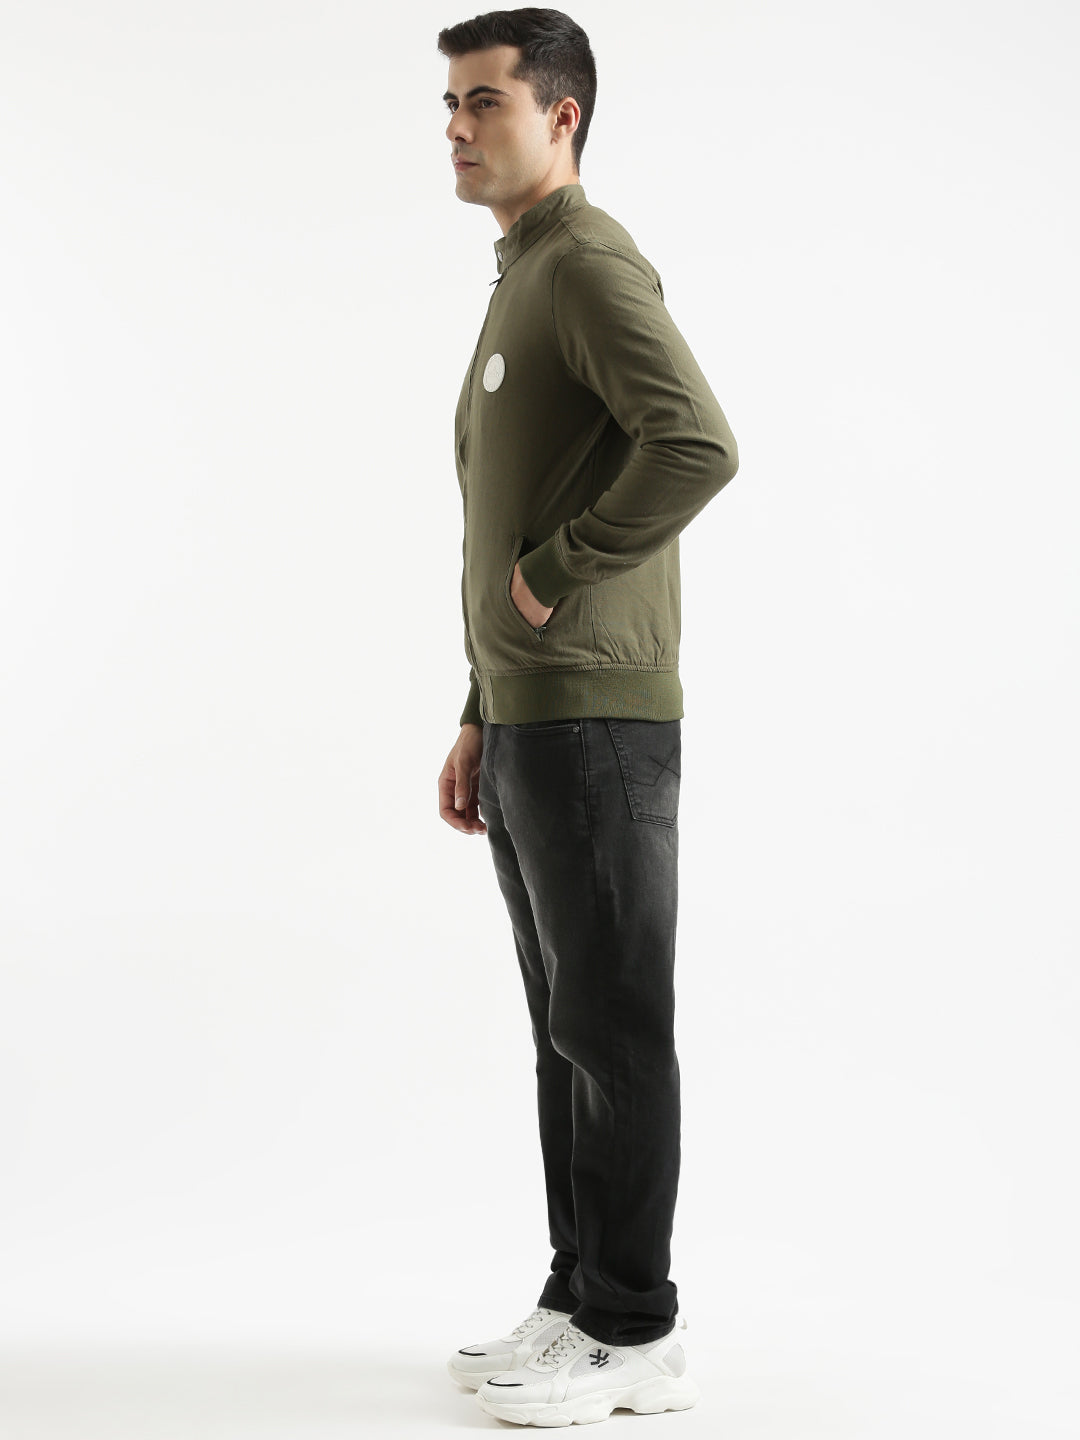 Solid Casual Chic Olive Jacket